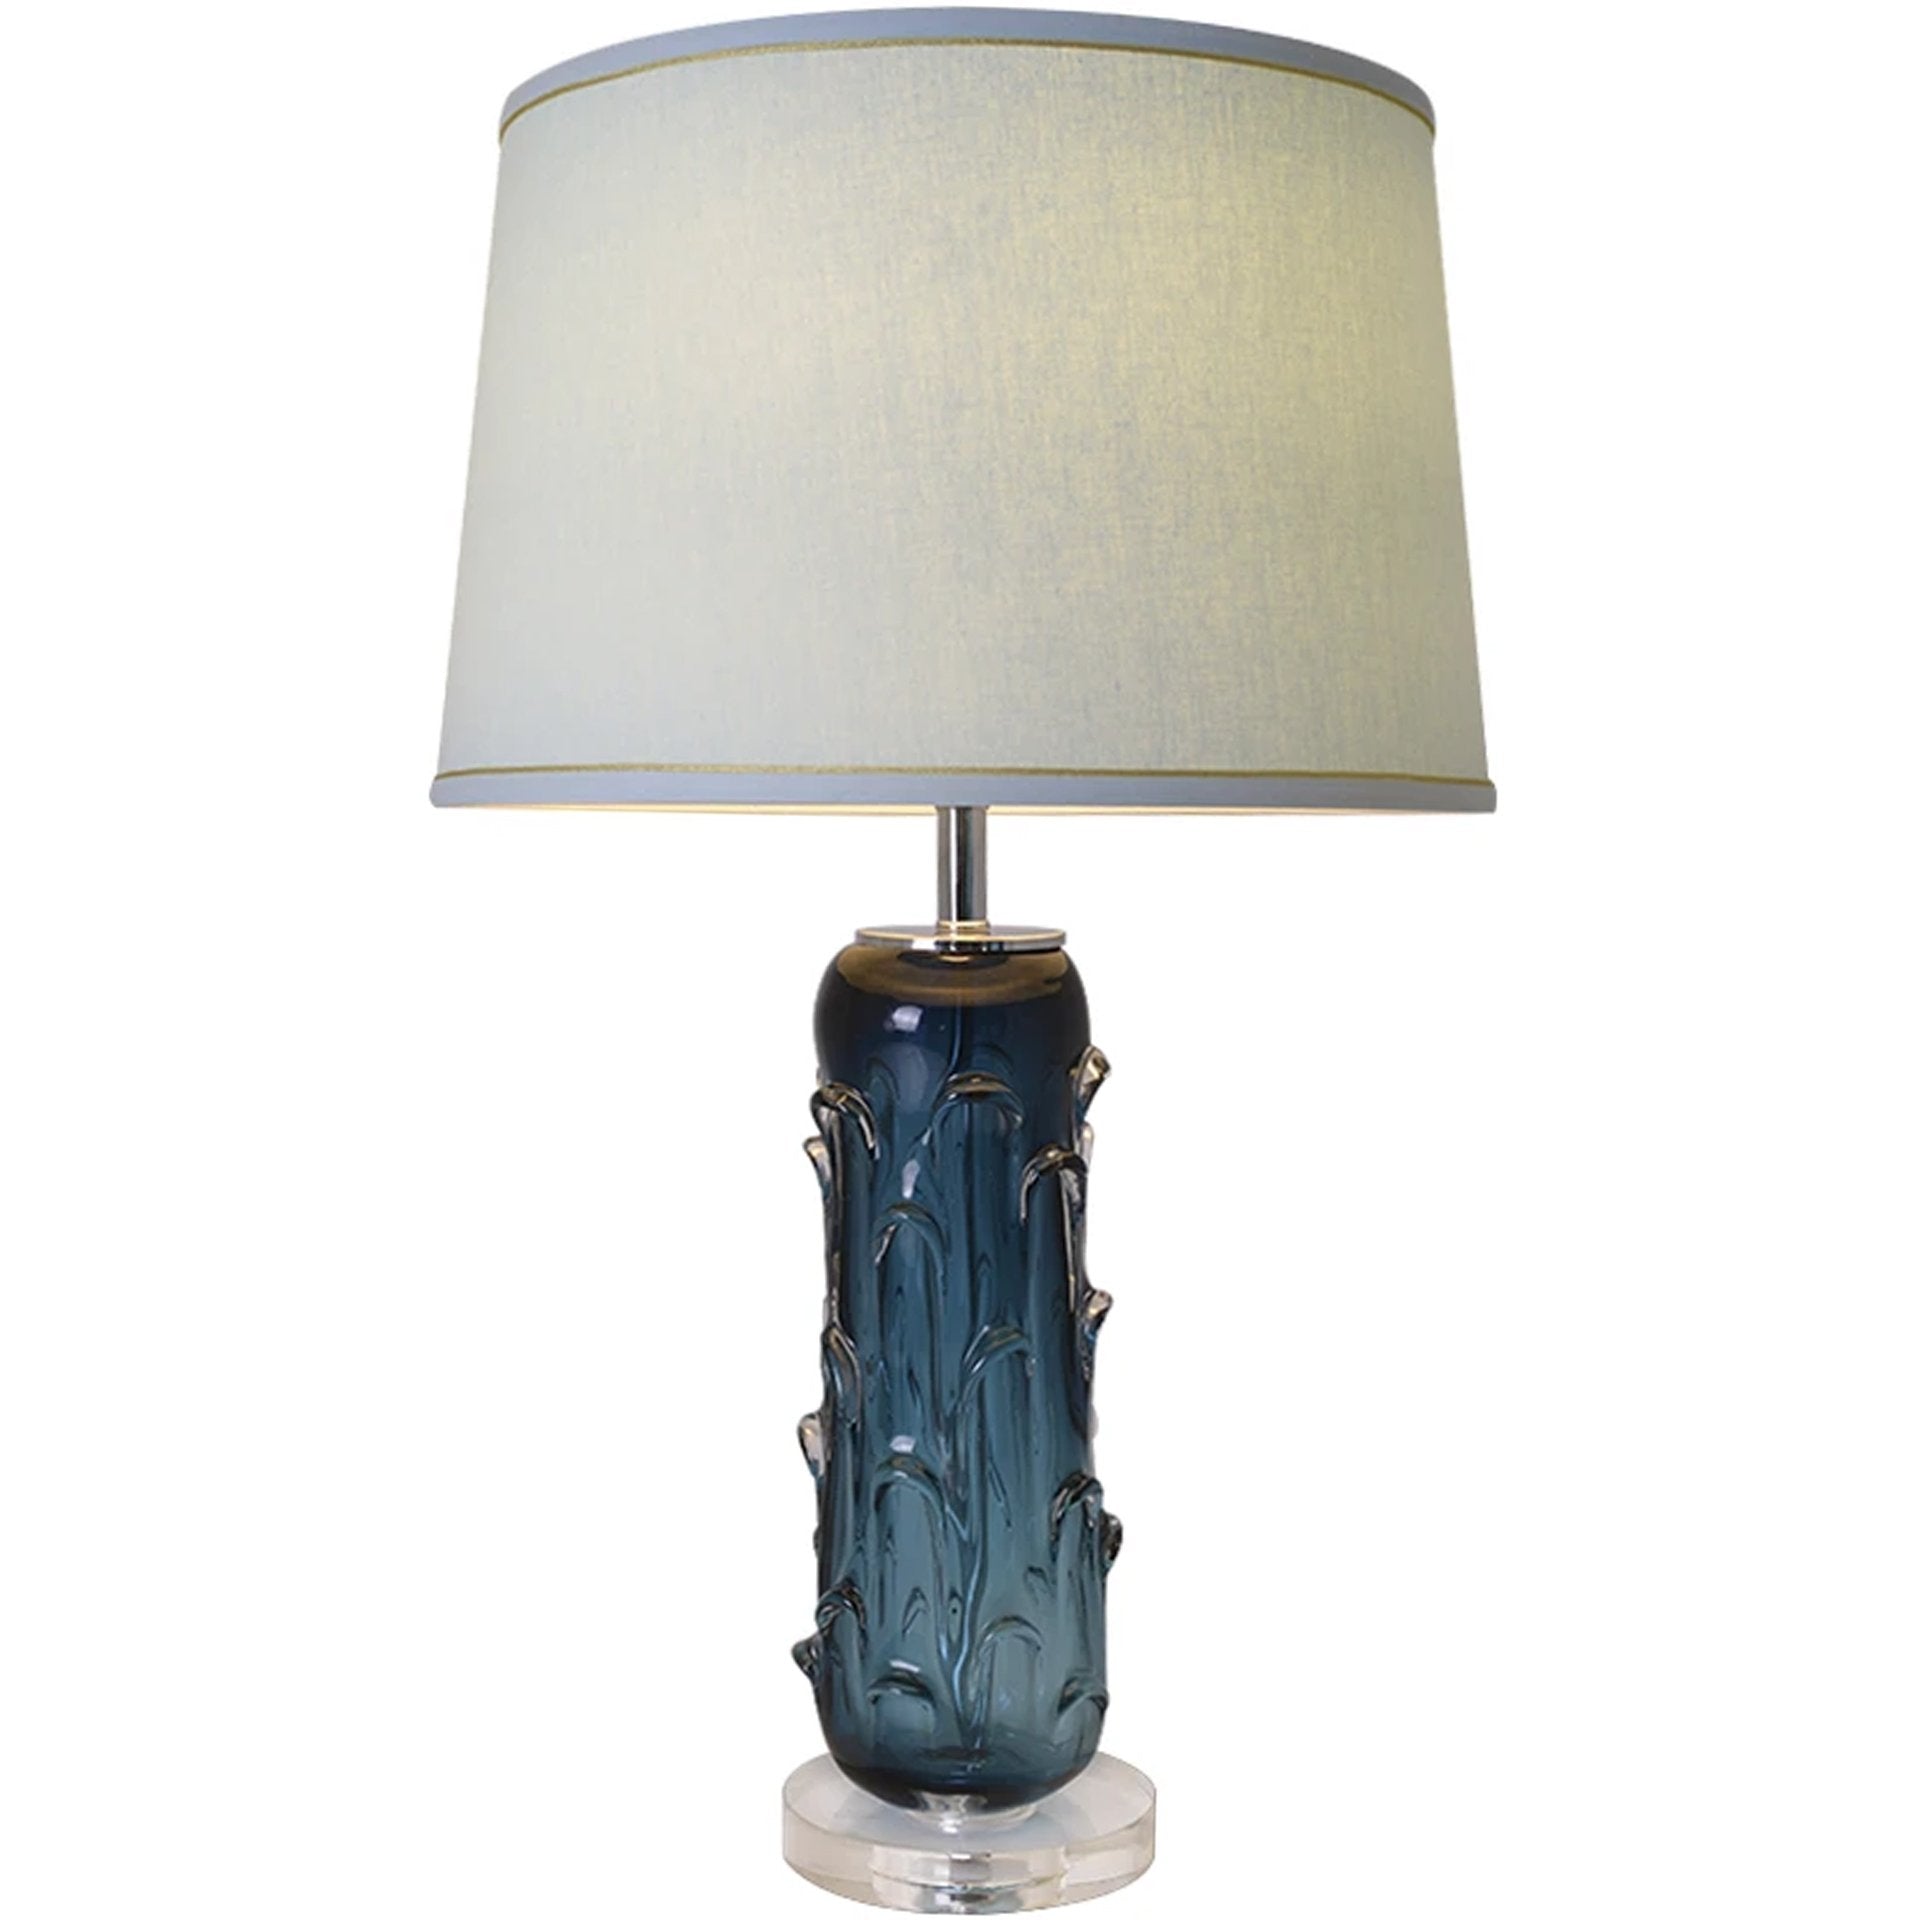 Jacinto Sculpted Translucent Glass Accent Table Lamp 27"